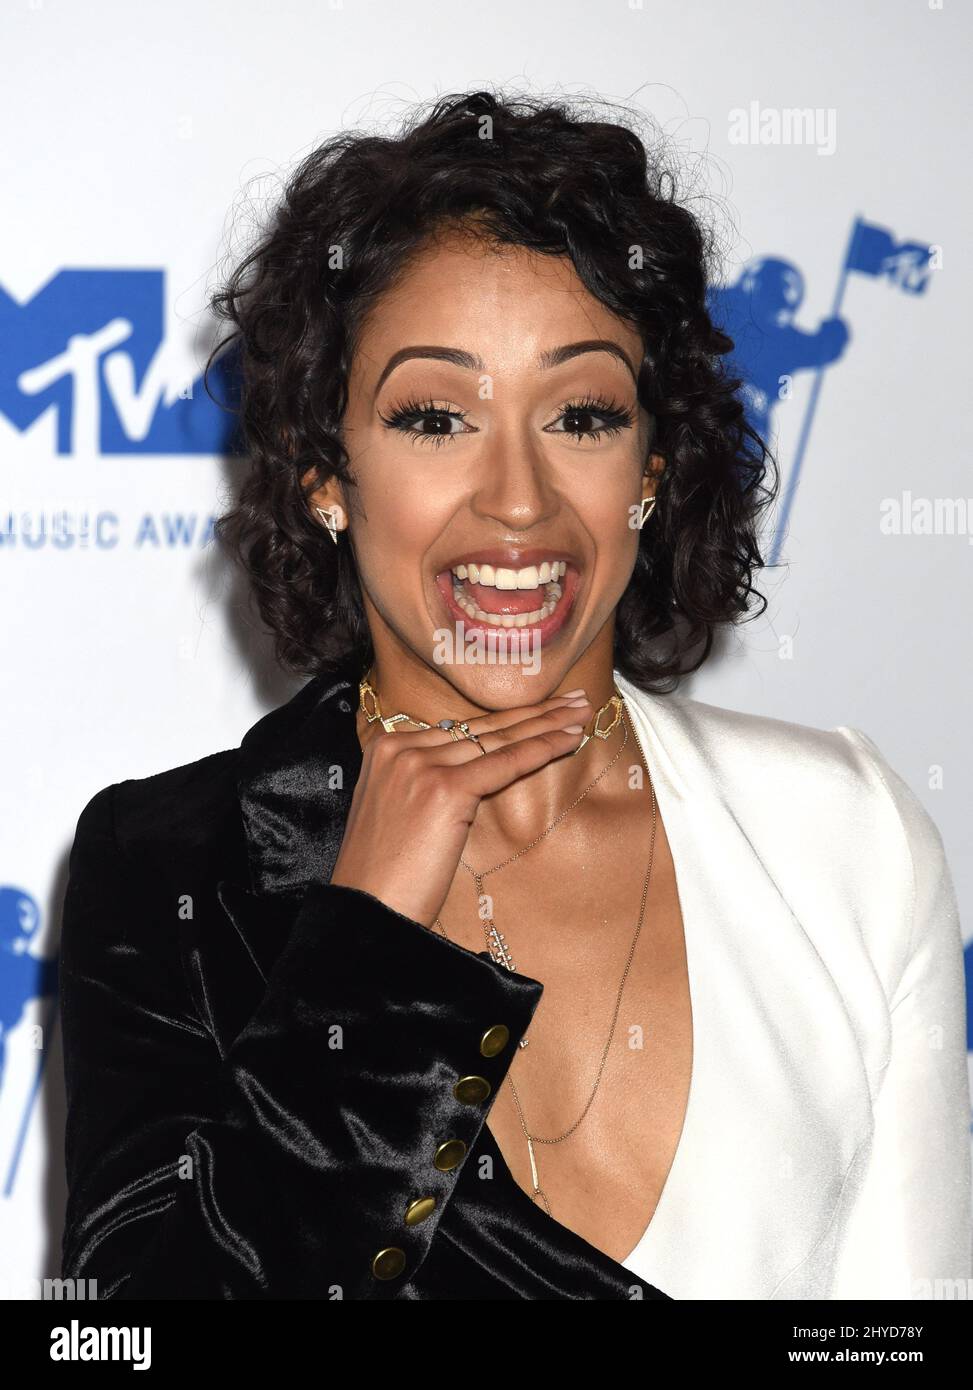 Liza Koshy in the press room at the MTV Video Music Awards 2017 held at The Forum in Los Angeles, USA Stock Photo